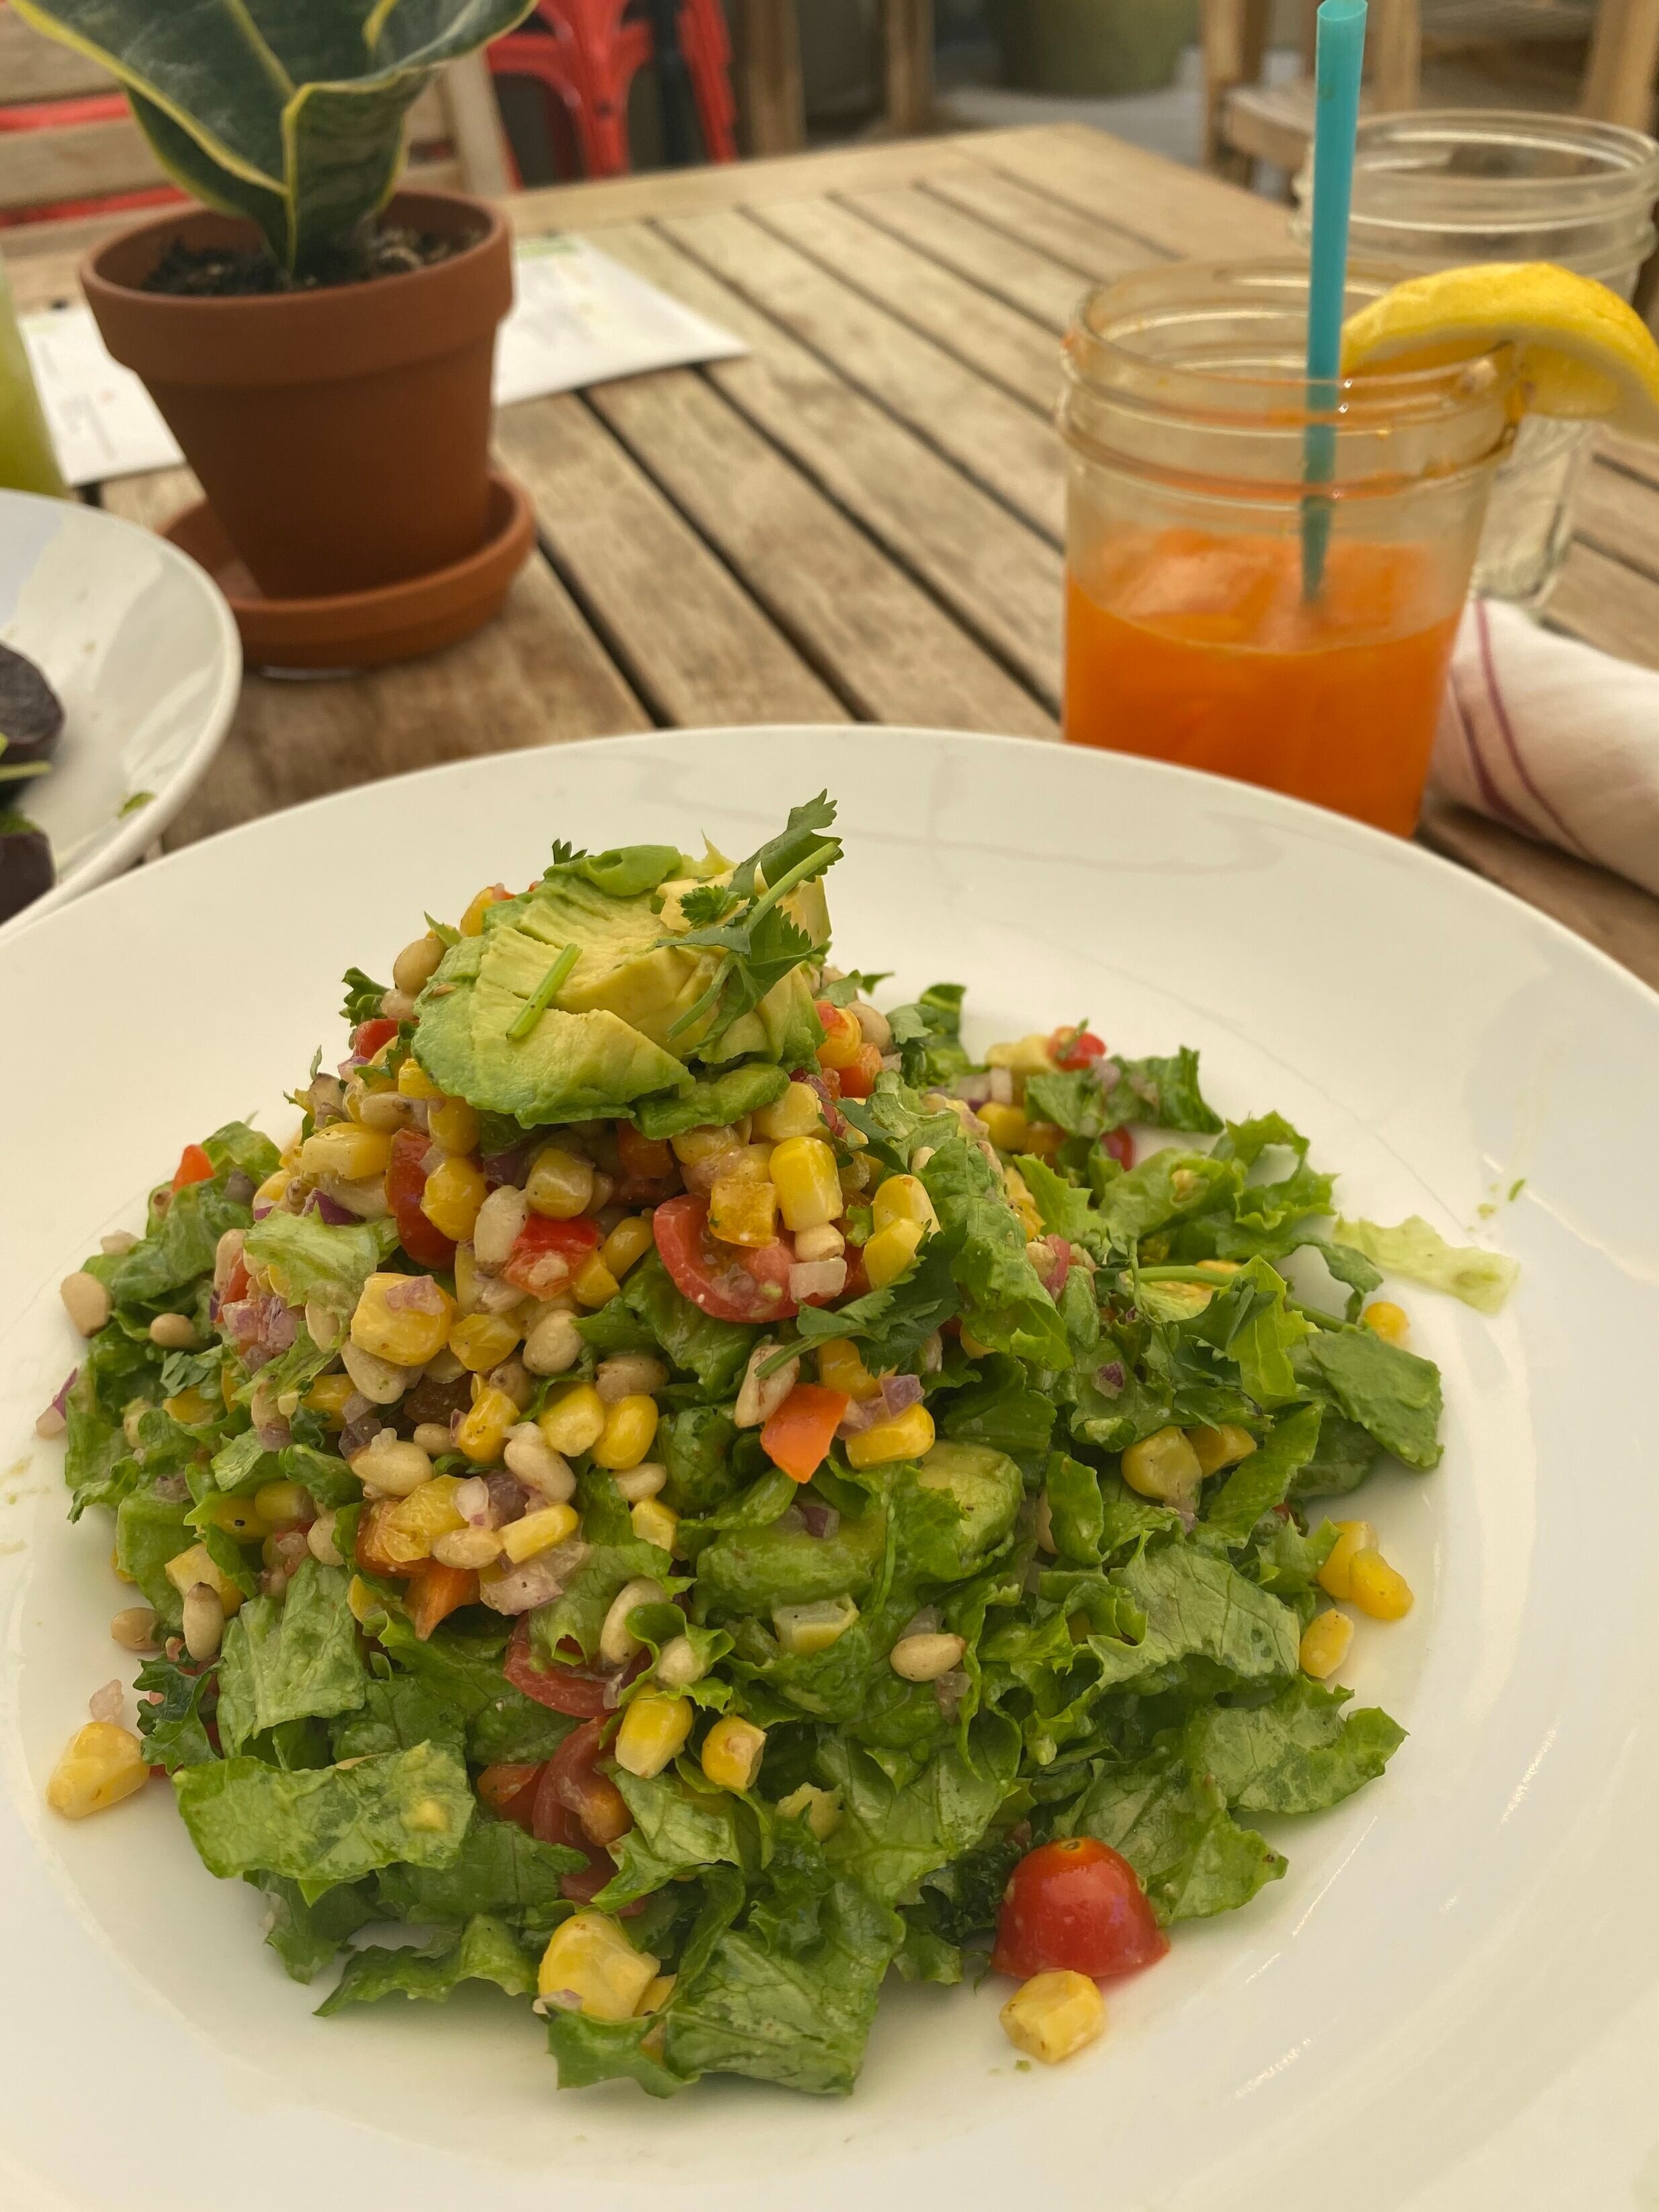 Plate of salad with corn and avocado and a Mason jar of fruit and vegetable juice on an outdoor restaurant table